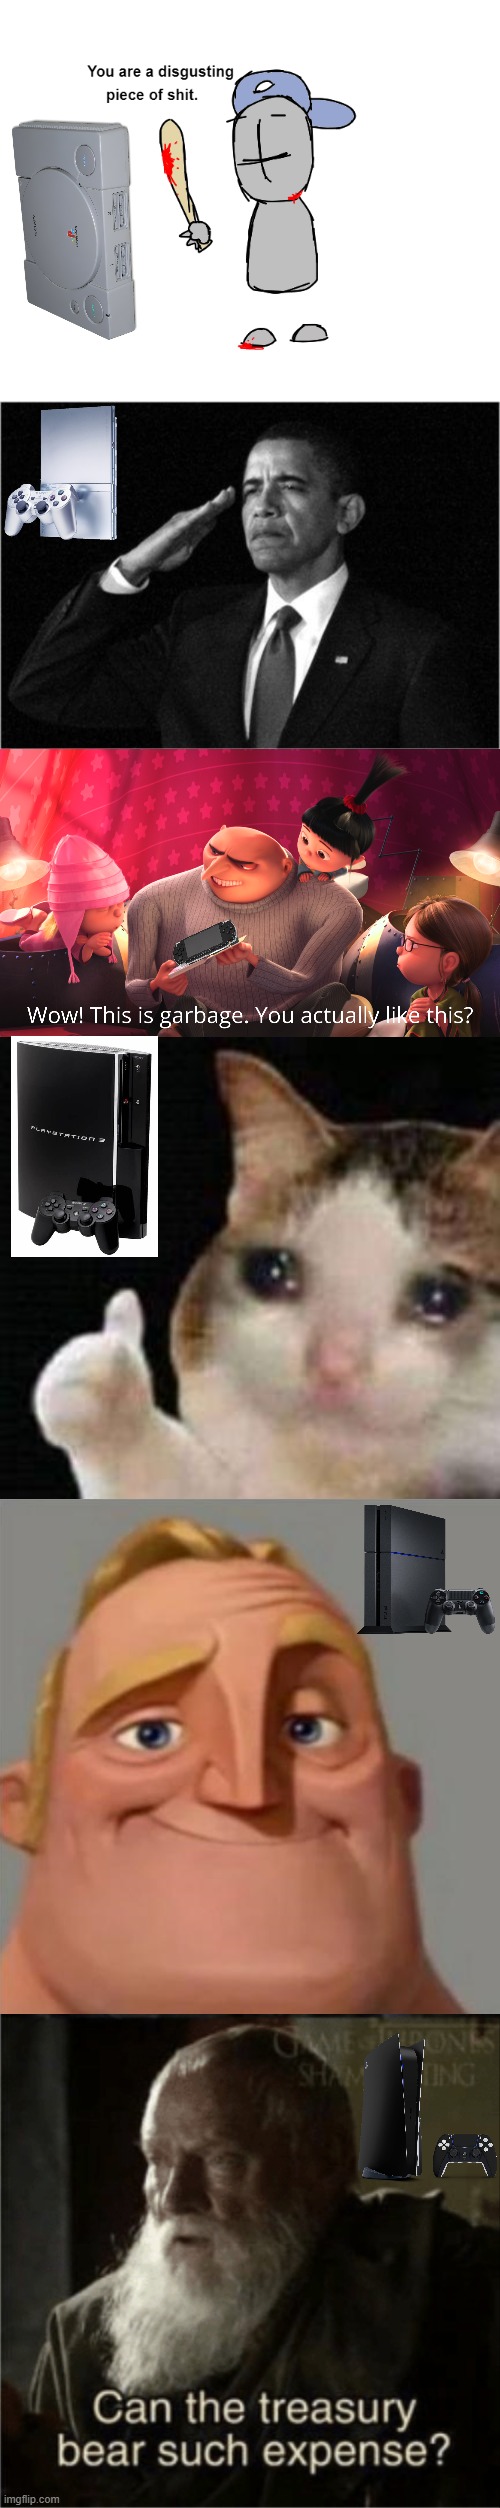 Reacting to playstation consoles | image tagged in you are a disgusting piece of shit,obama-salute,wow this is garbage you actually like this,approved crying cat,teacher's copy | made w/ Imgflip meme maker